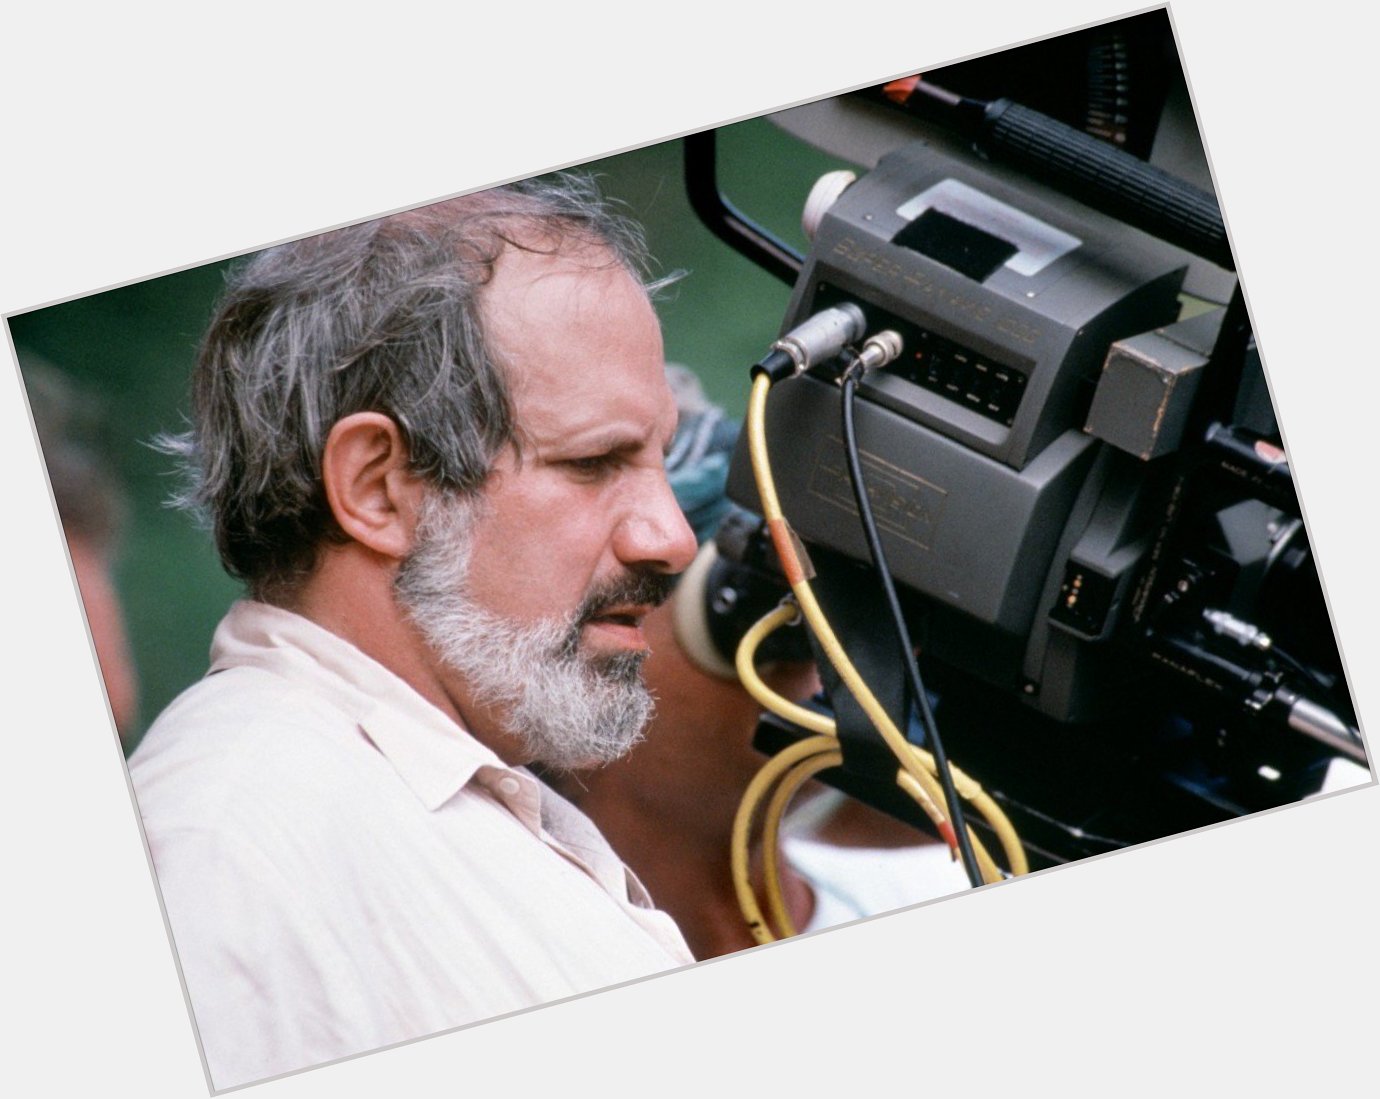 Happy birthday to Brian De Palma! One of my favorite directors of New Hollywood generation. 